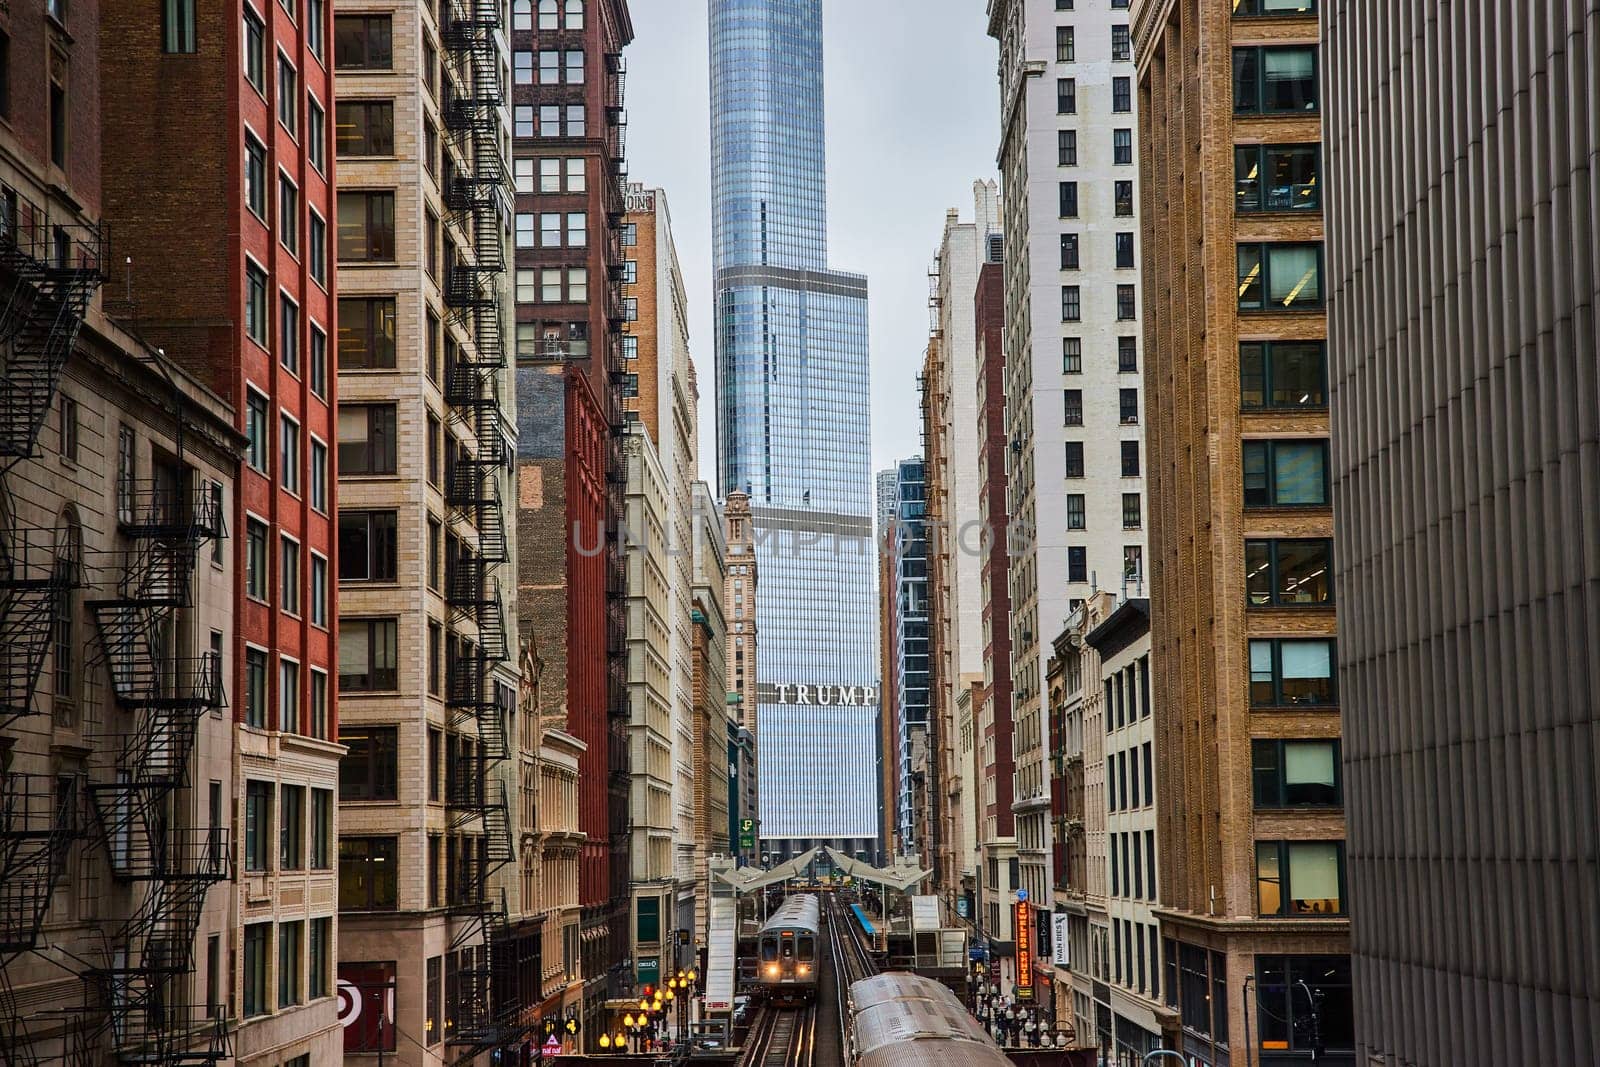 Elevated Train in Urban Canyon Amid Architectural Diversity by njproductions